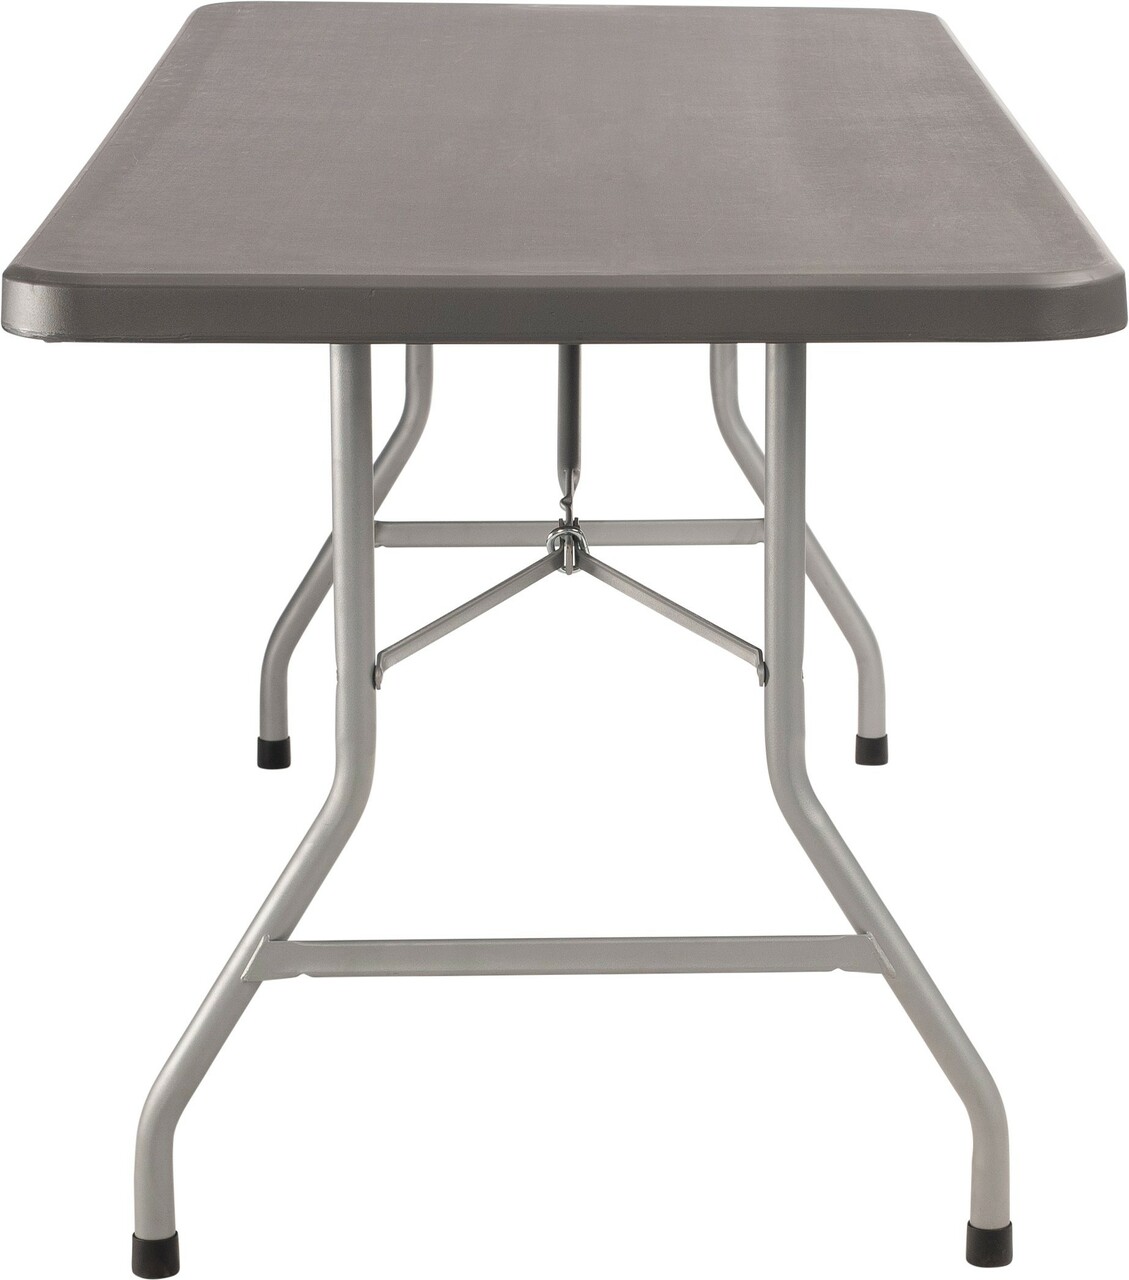 NPS 30" x 72" Heavy Duty Folding Table - Charcoal Slate Top and Silver Frame